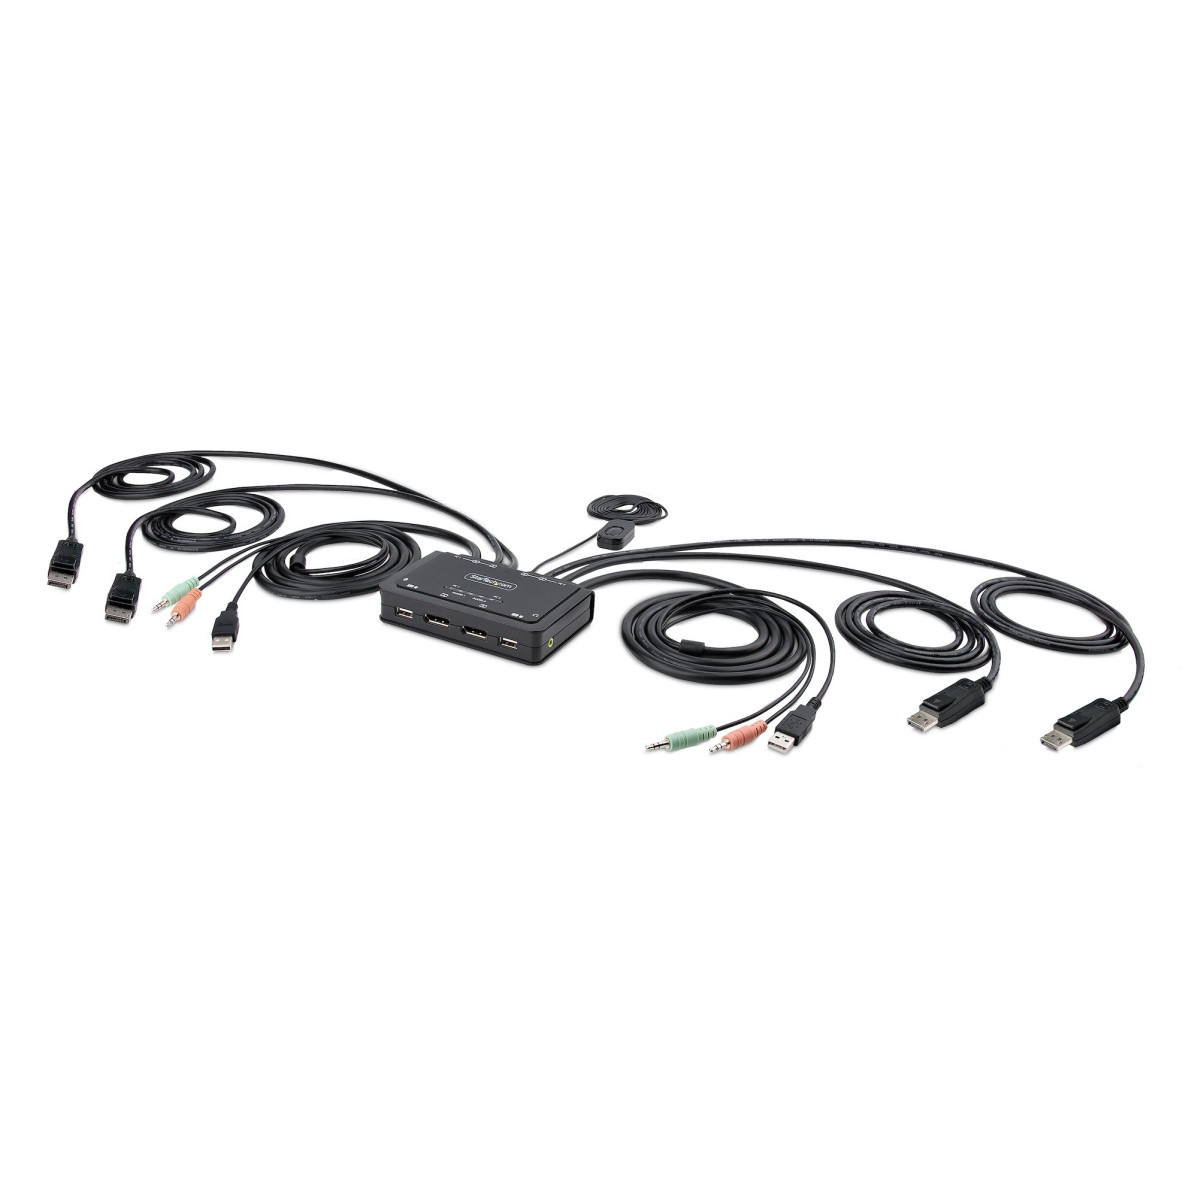 2-Port Dual-Monitor Cable KVM Switch